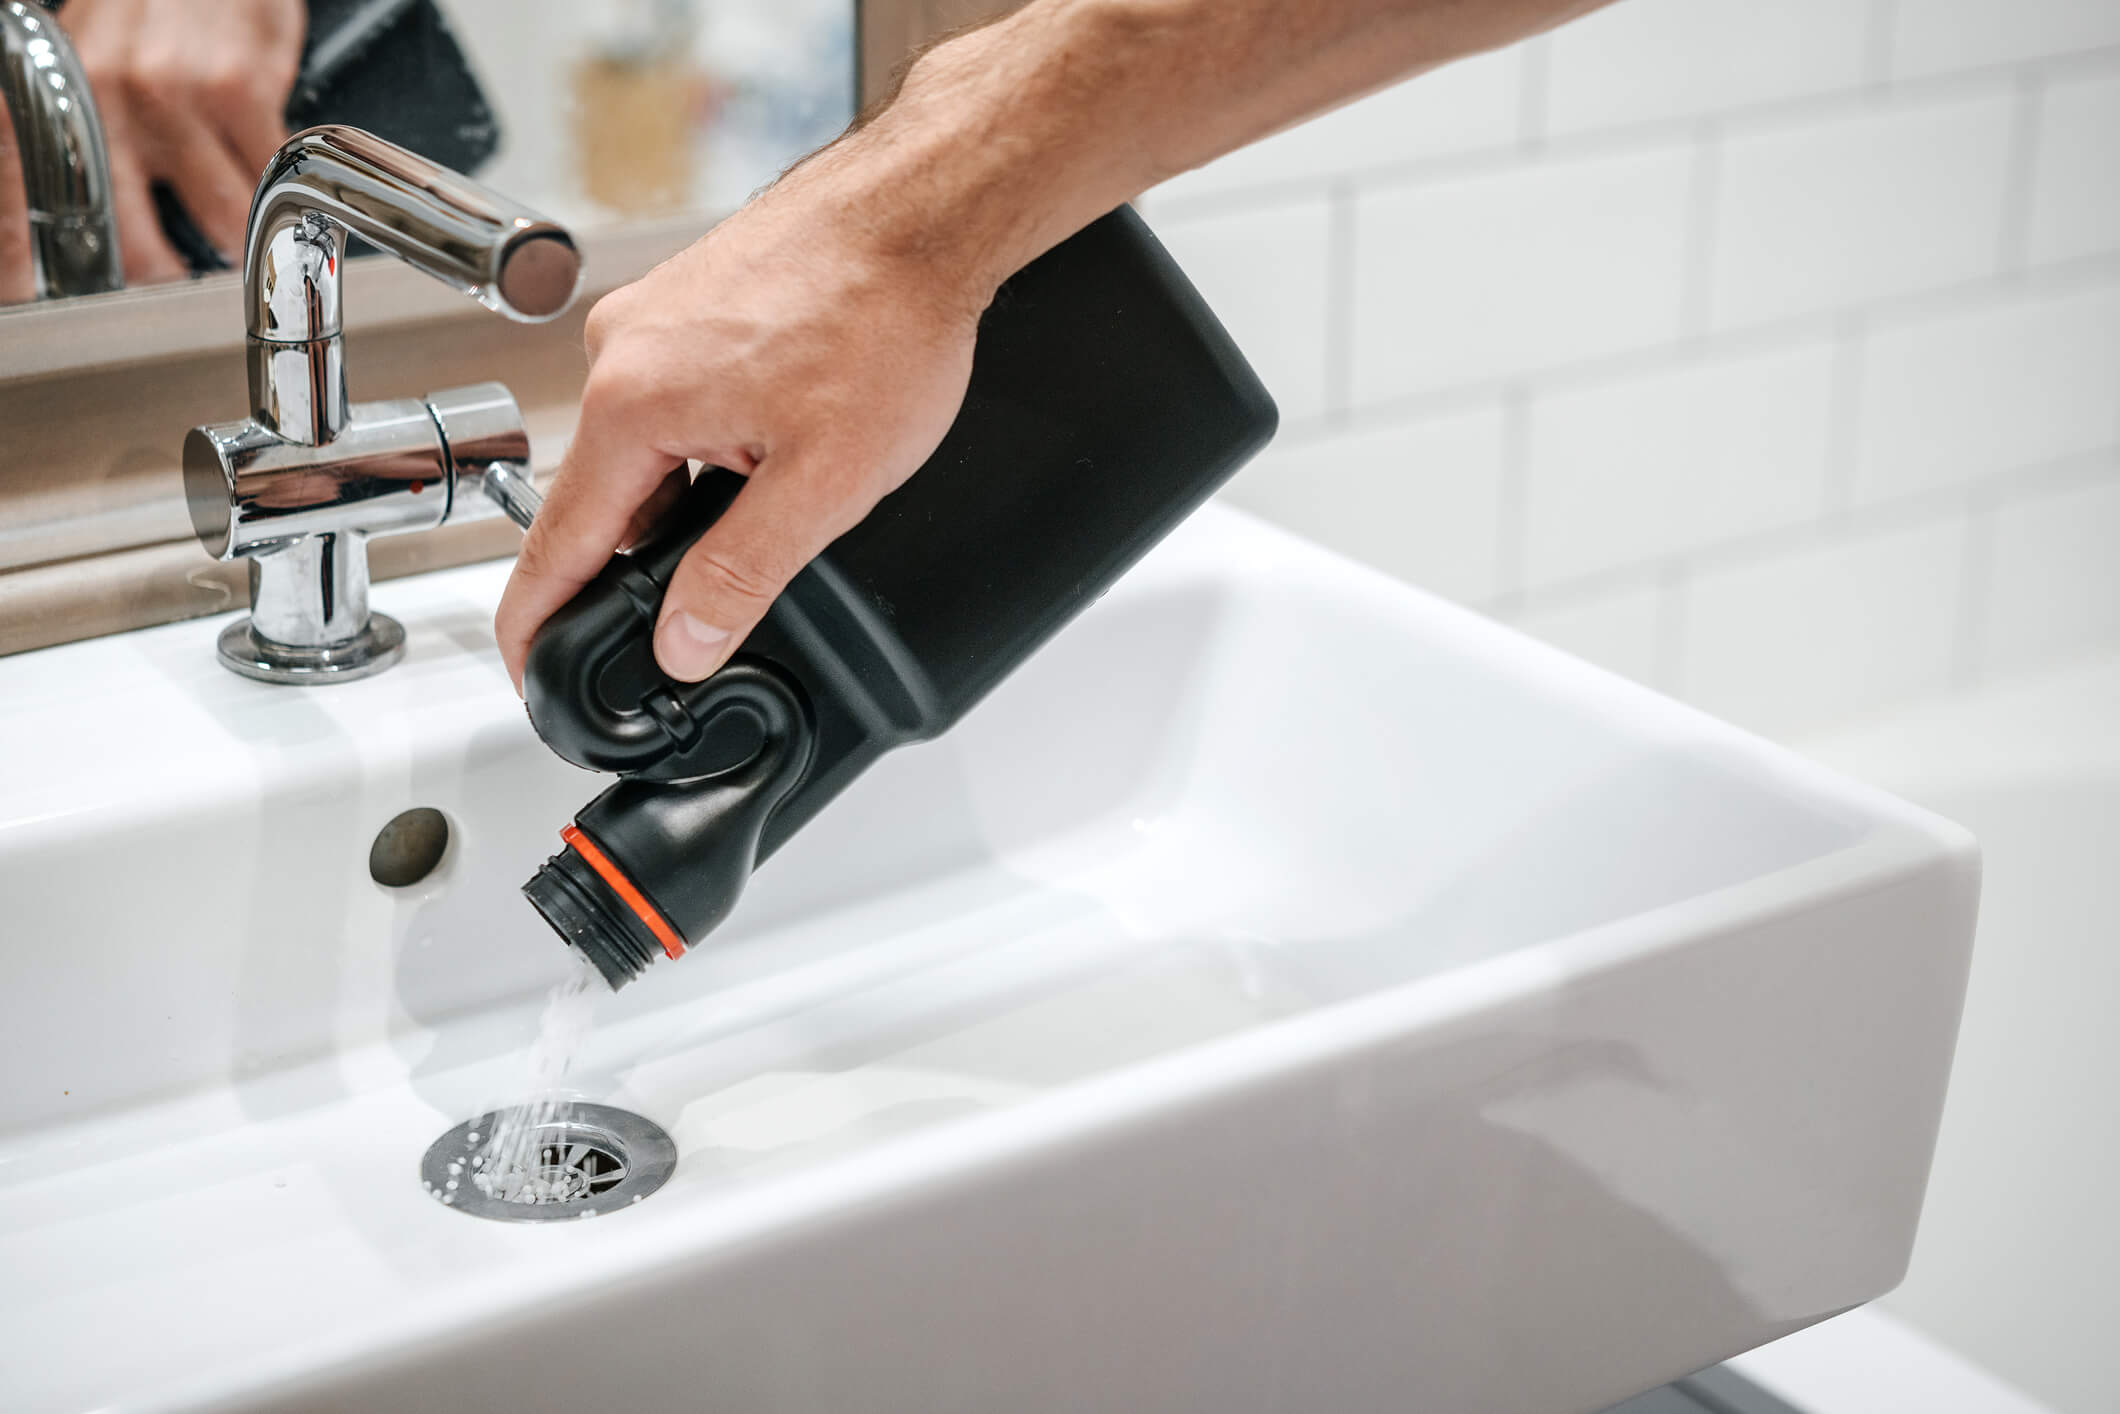 Keep Your Drains Flowing and Clean with Professional Drain Cleaning